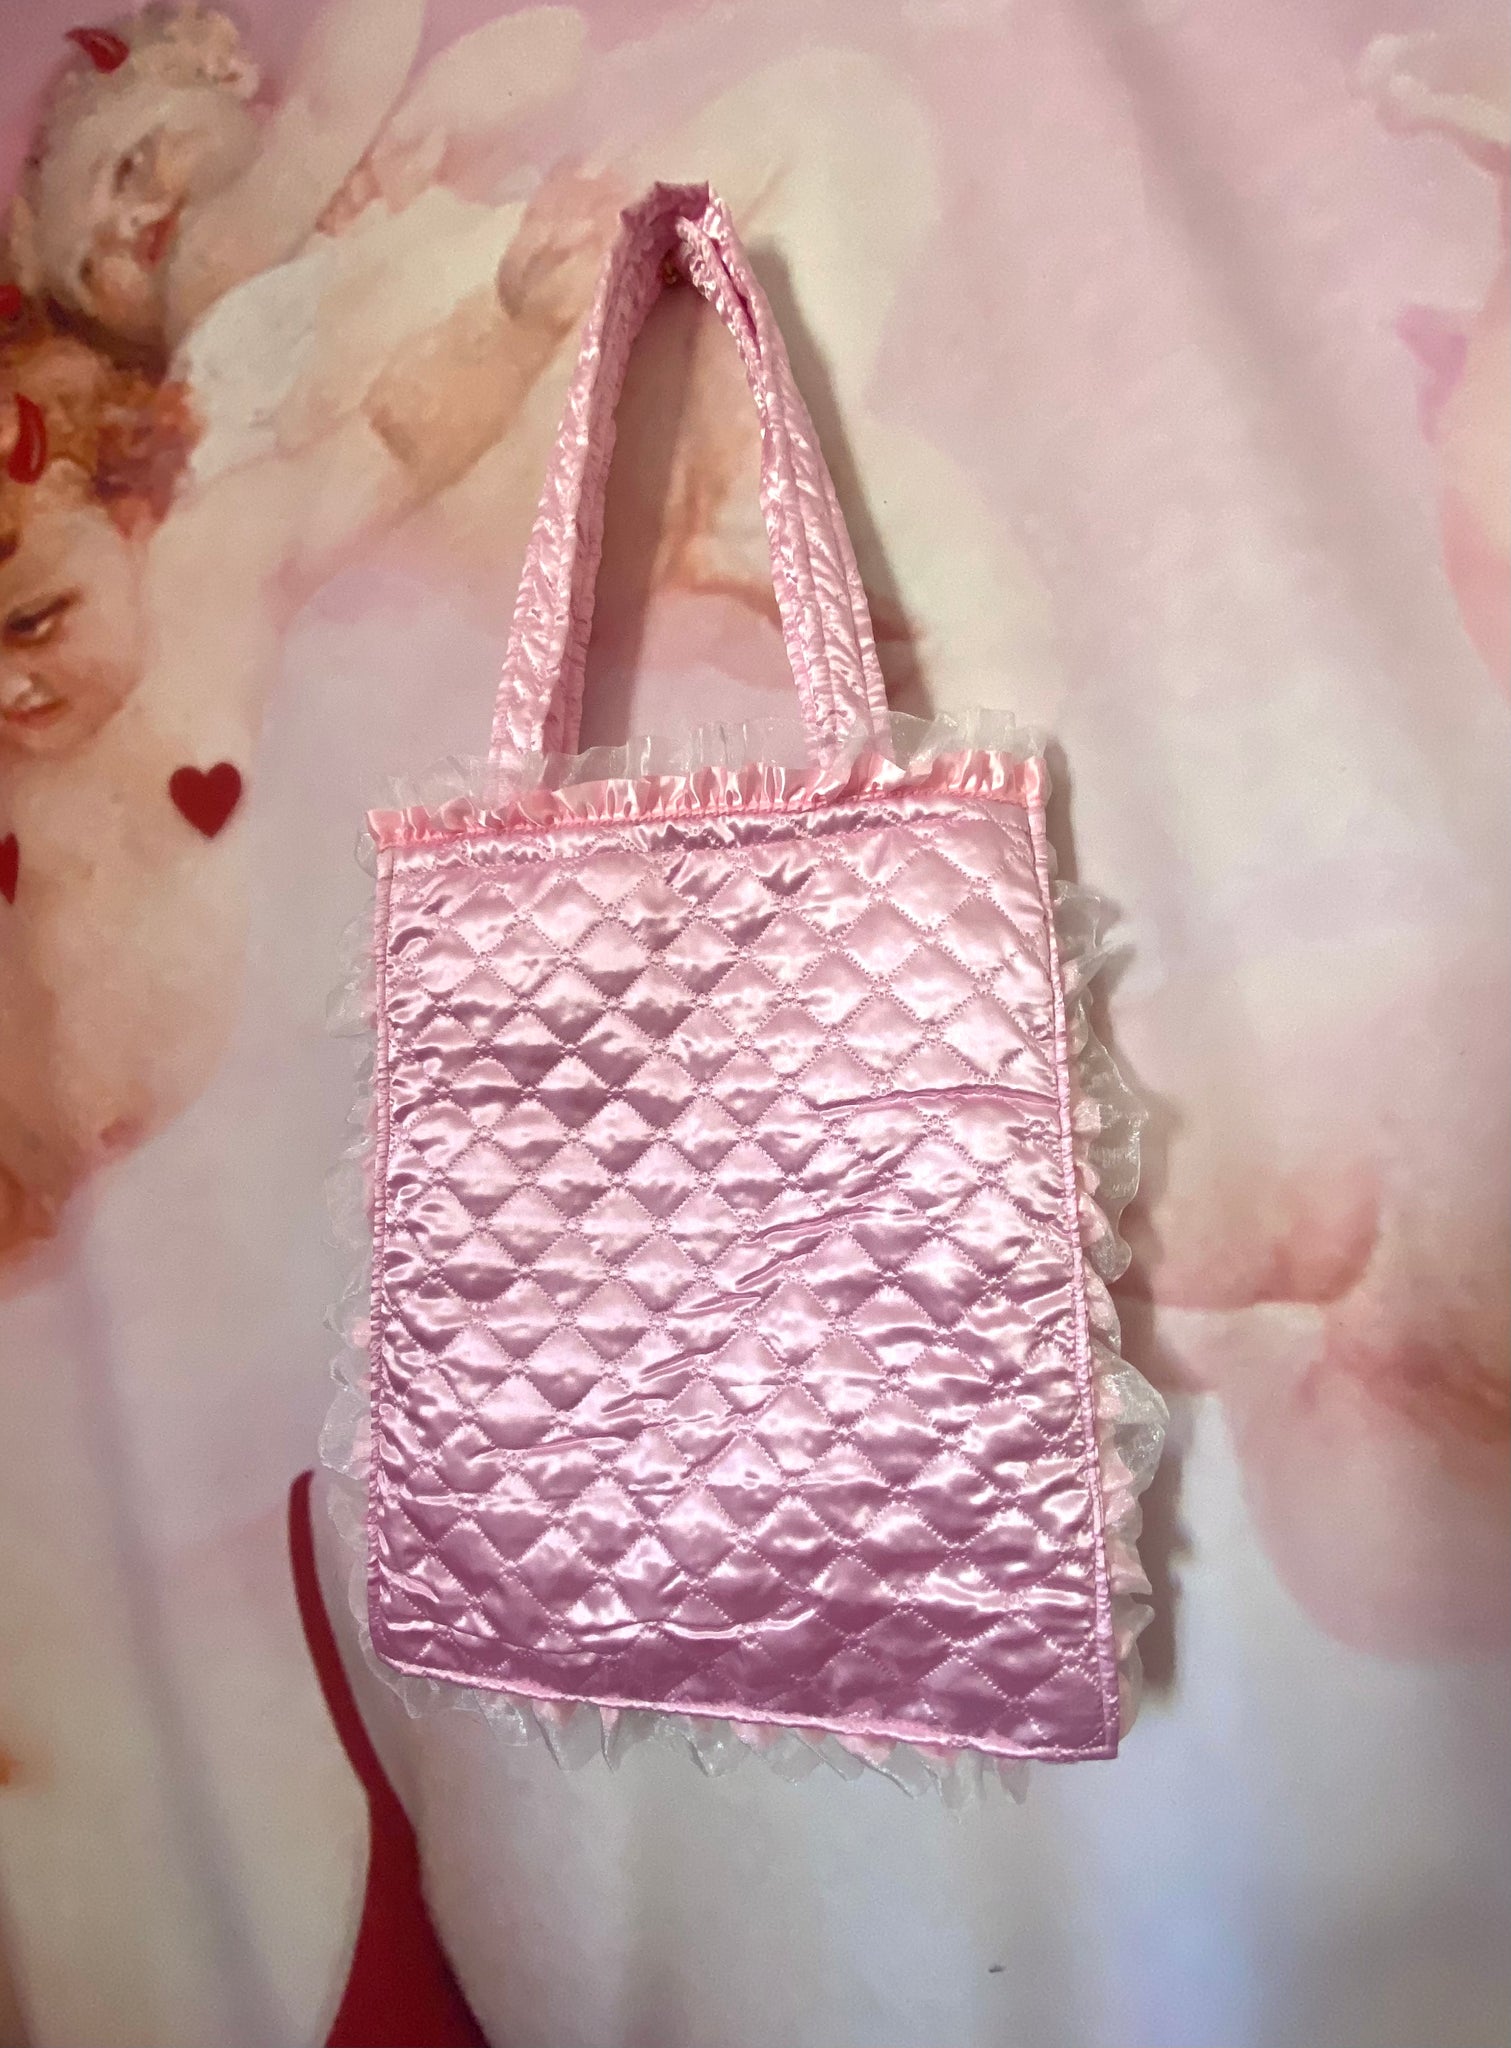 Basketball Shaped Statement Purse in Pink Sling Hand Bag | eBay